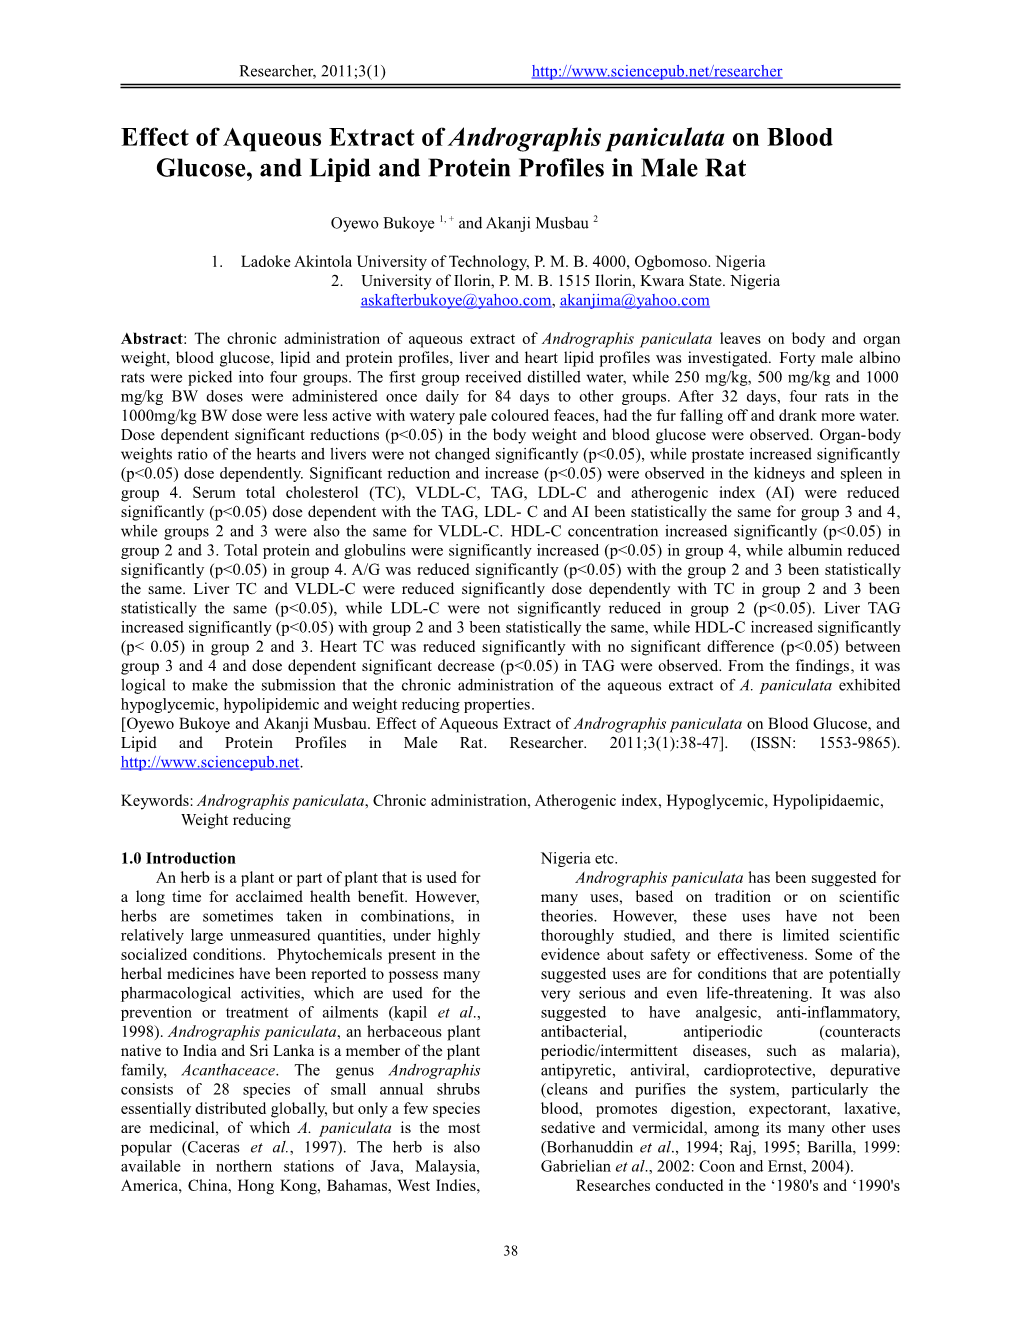 Glucose, and Lipid and Protein Profiles in Male Rat